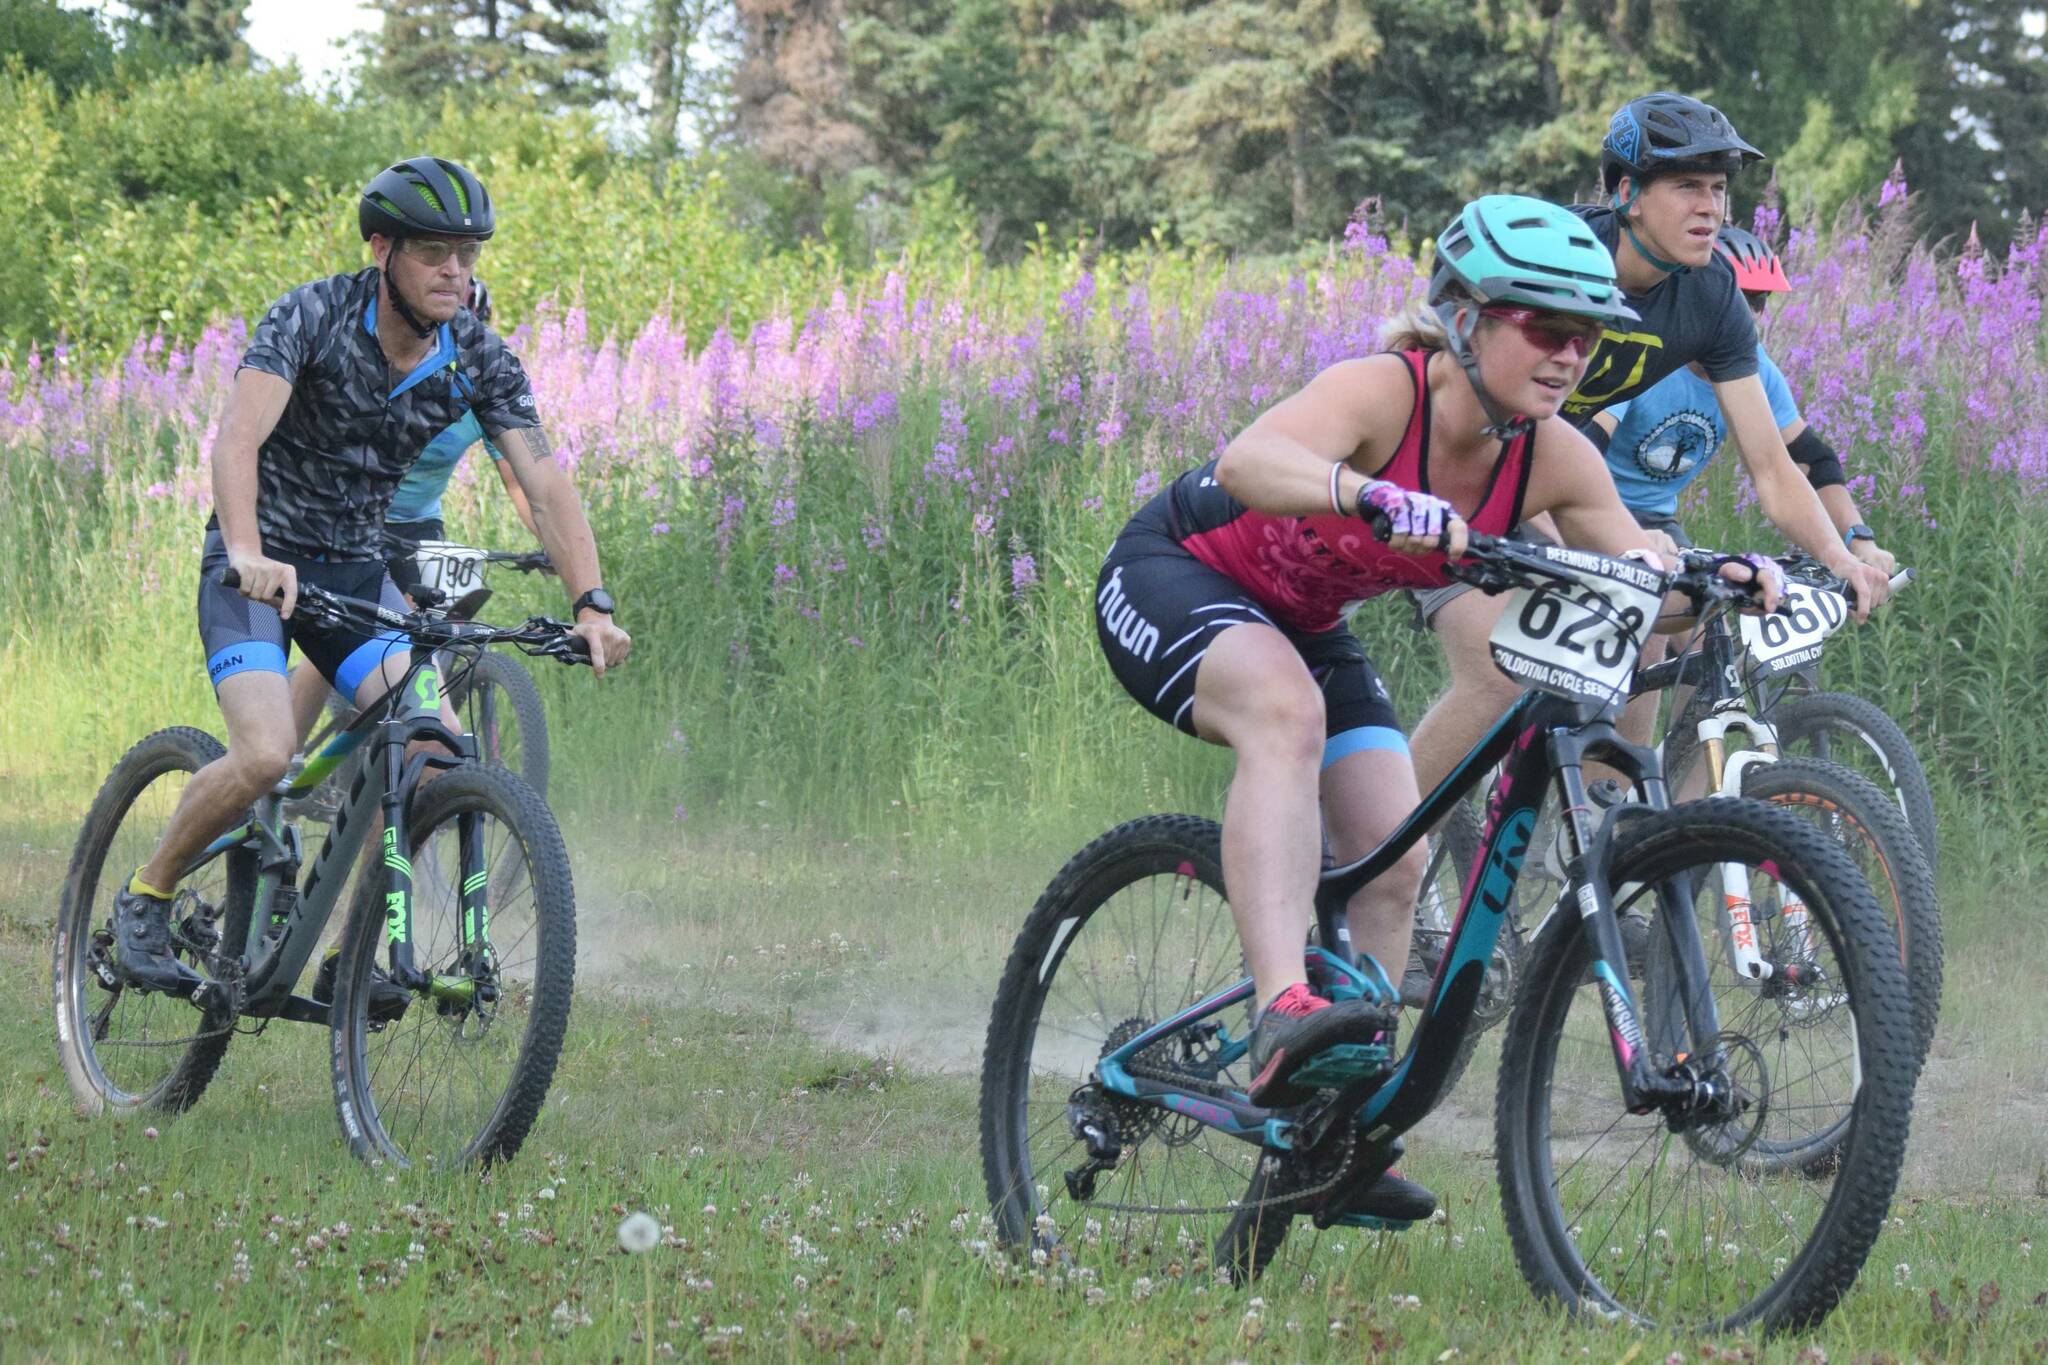 Morgan Aldridge leads riders down a hill at the start of Week 3 of the Soldotna Cycle Series on Thursday, July 18, 2019, at Tsalteshi Trails. (Photo by Jeff Helminiak/Peninsula Clarion)